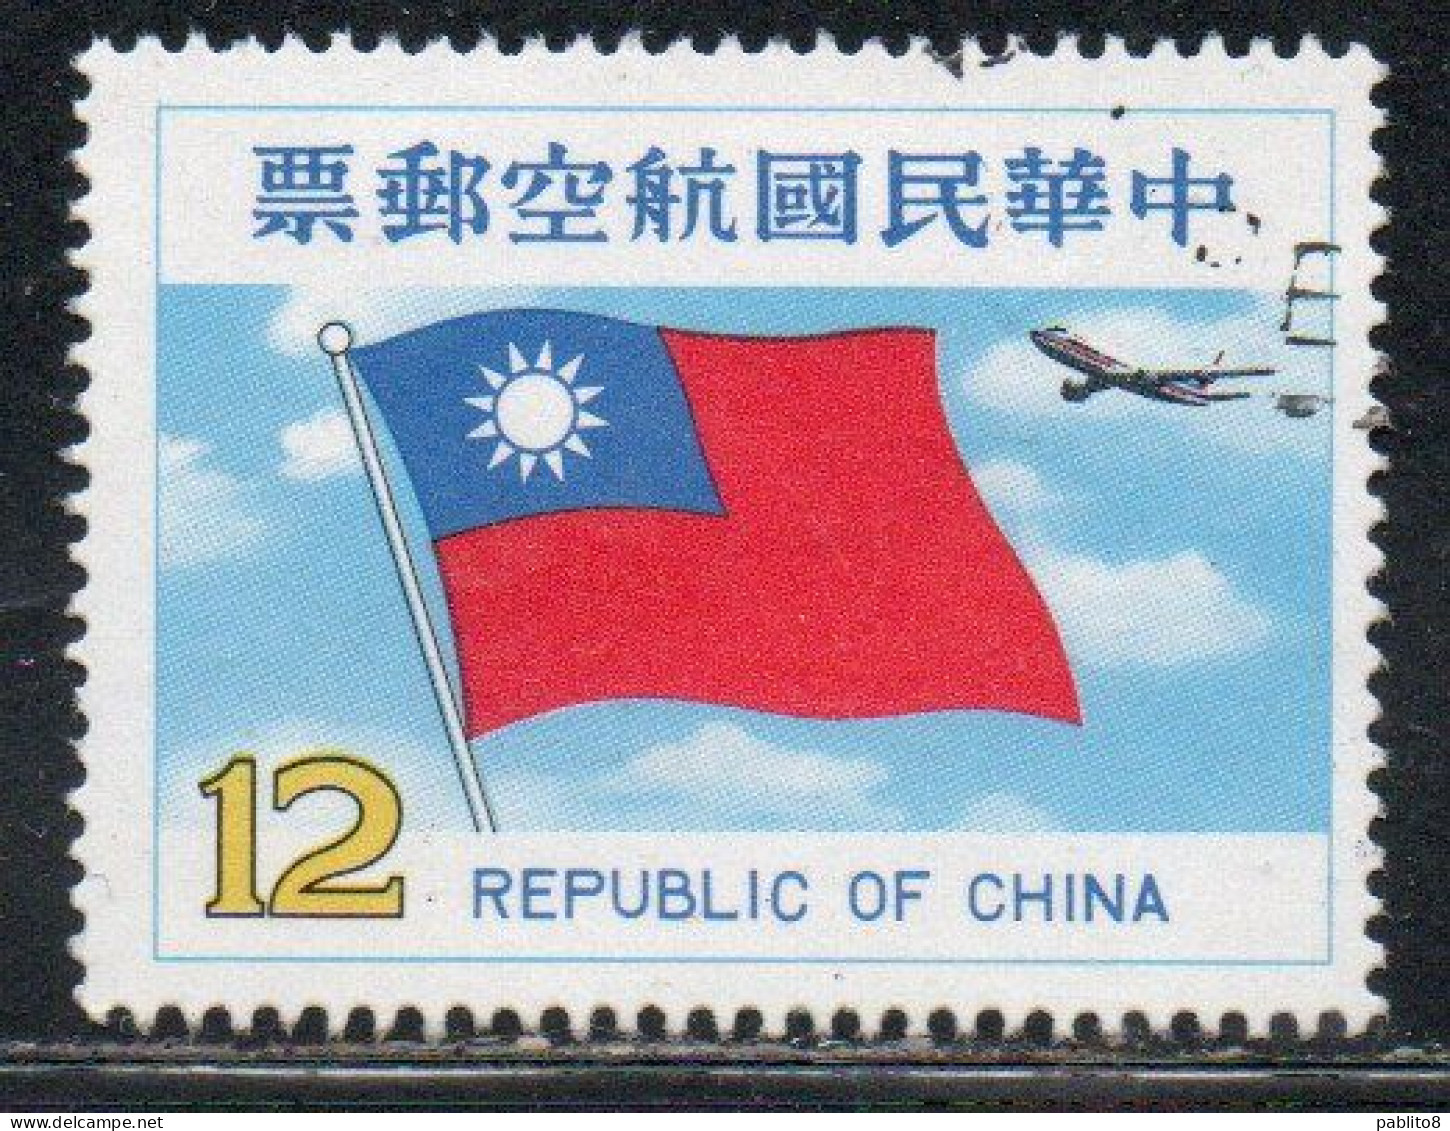 CHINA REPUBLIC CINA TAIWAN FORMOSA 1980 AIR POST MAIL AIRMAIL NATIONAL FLAG JET 12$ USED USATO OBLITERE' - Luftpost